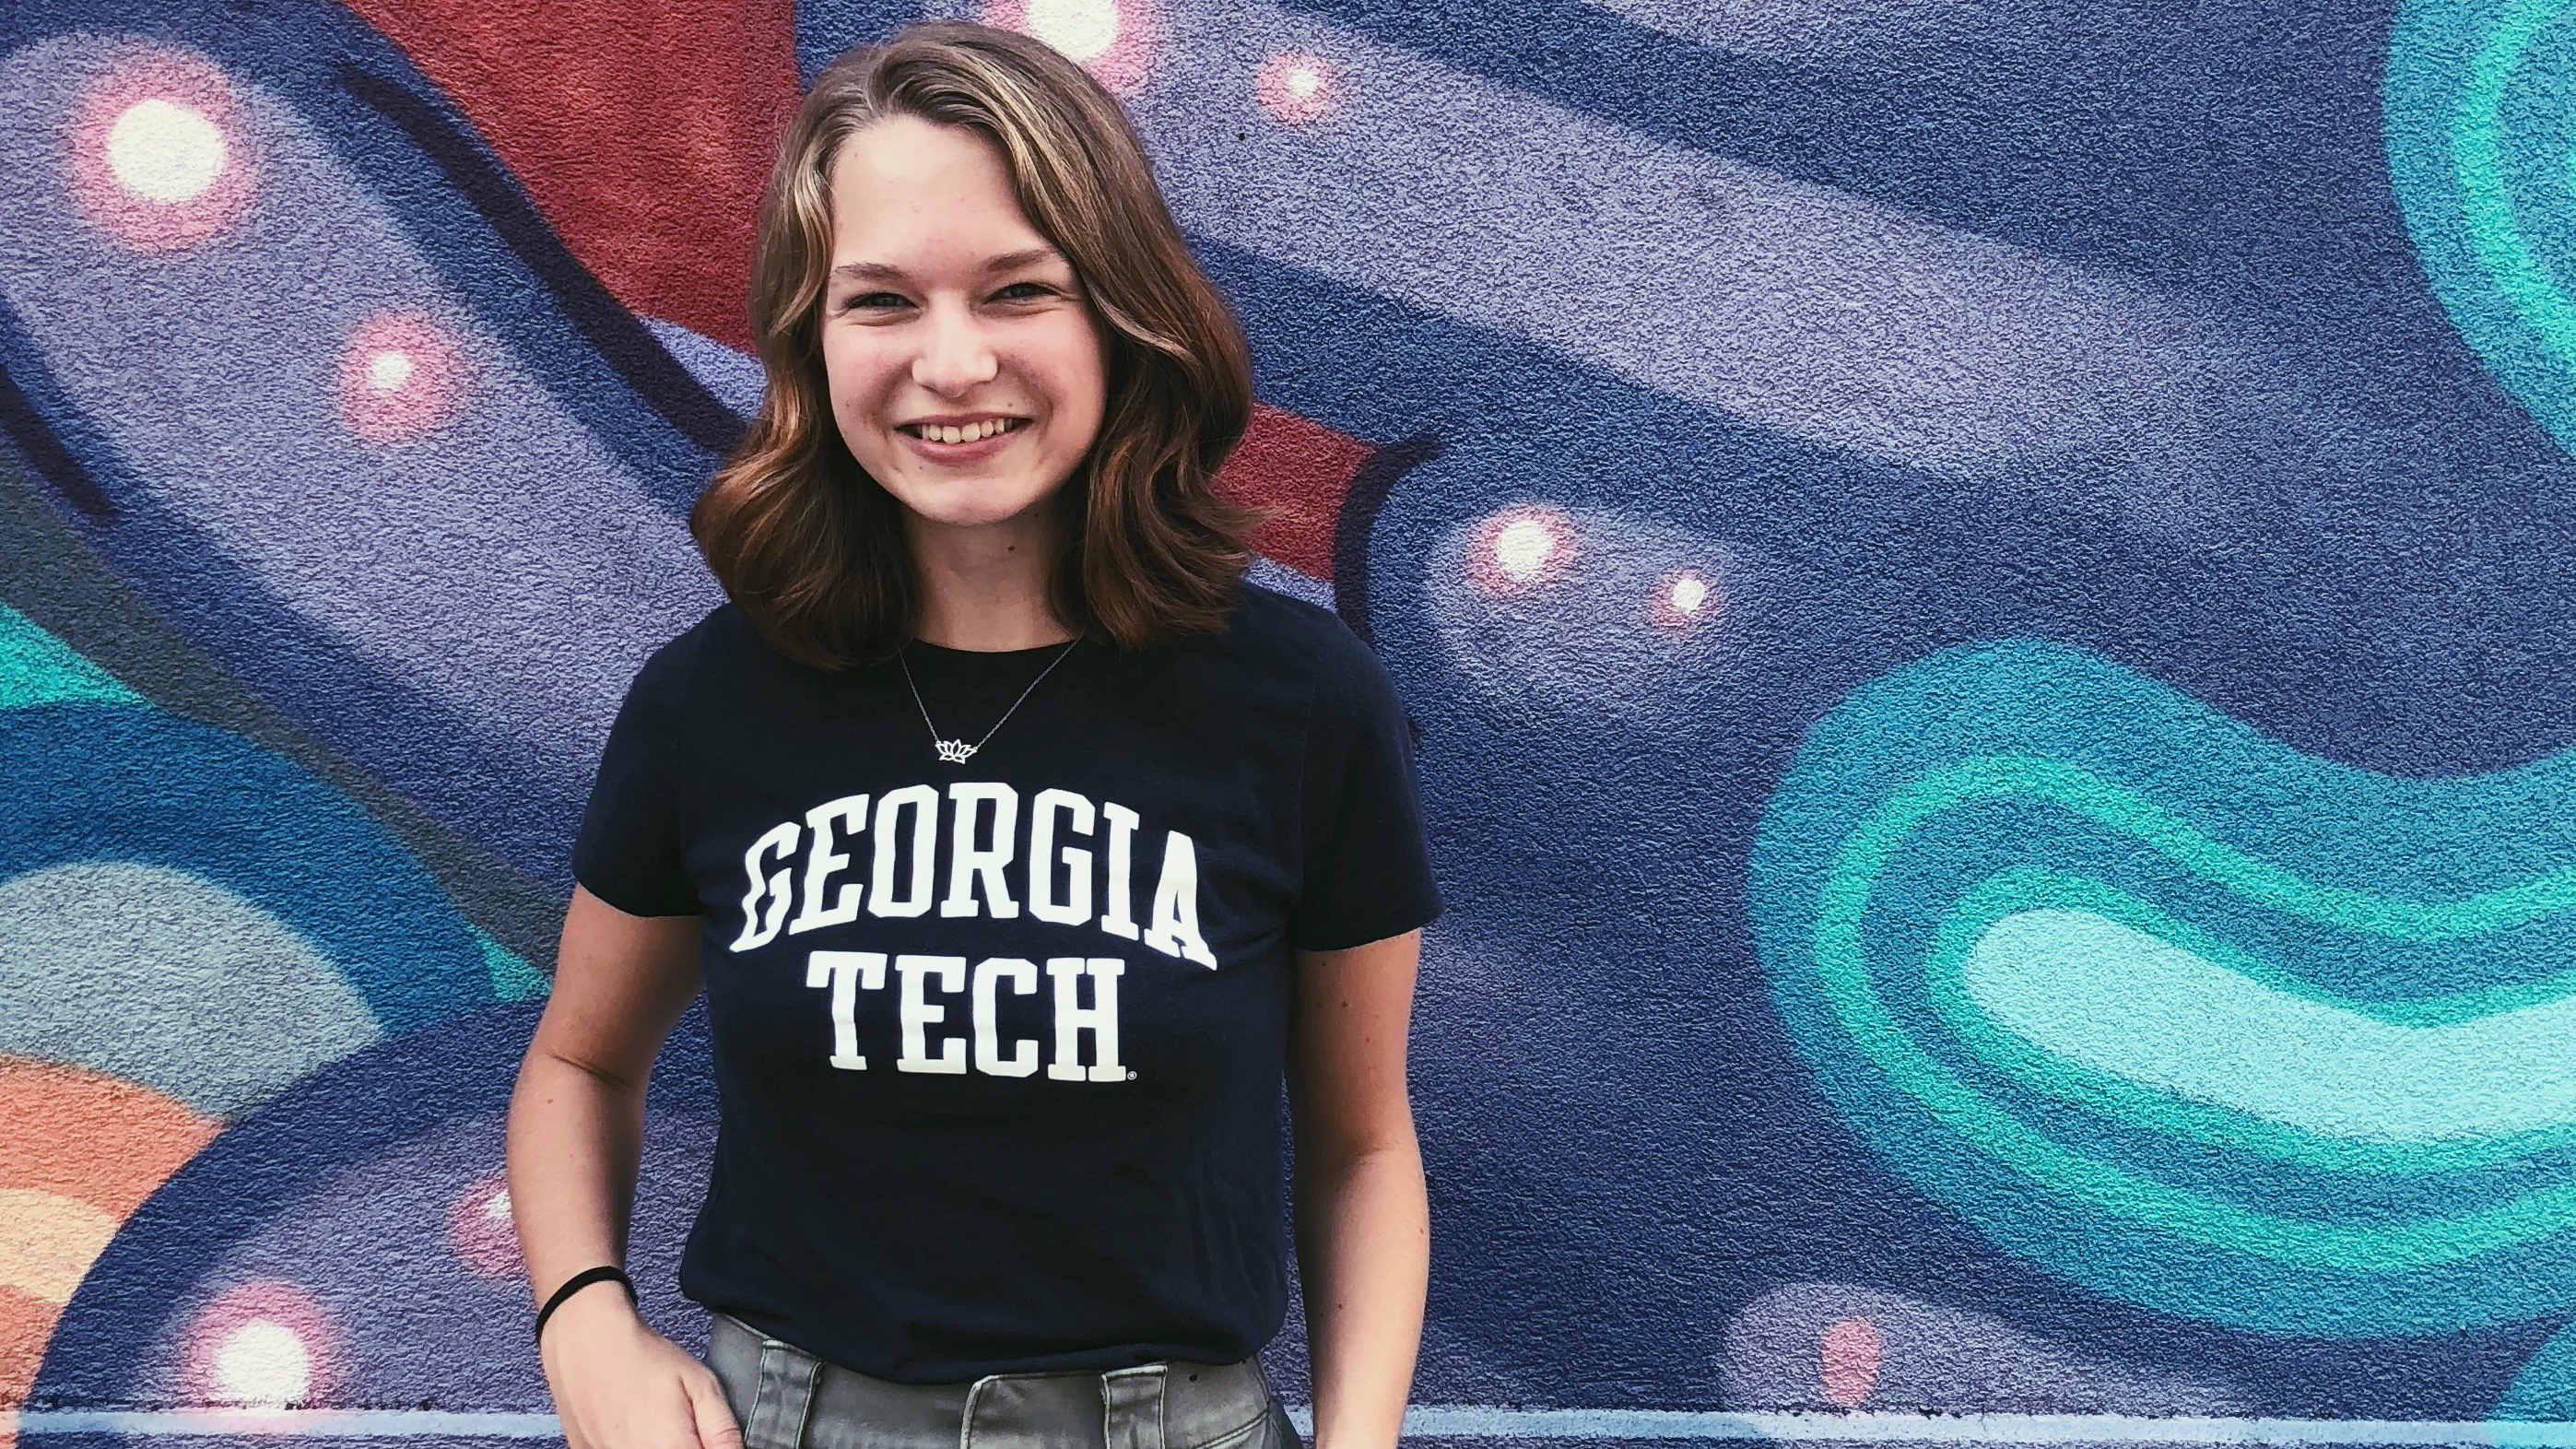 Ally Stout wearing a Georgia Tech shirt and posing in front of wall art in tones of blue and purple.